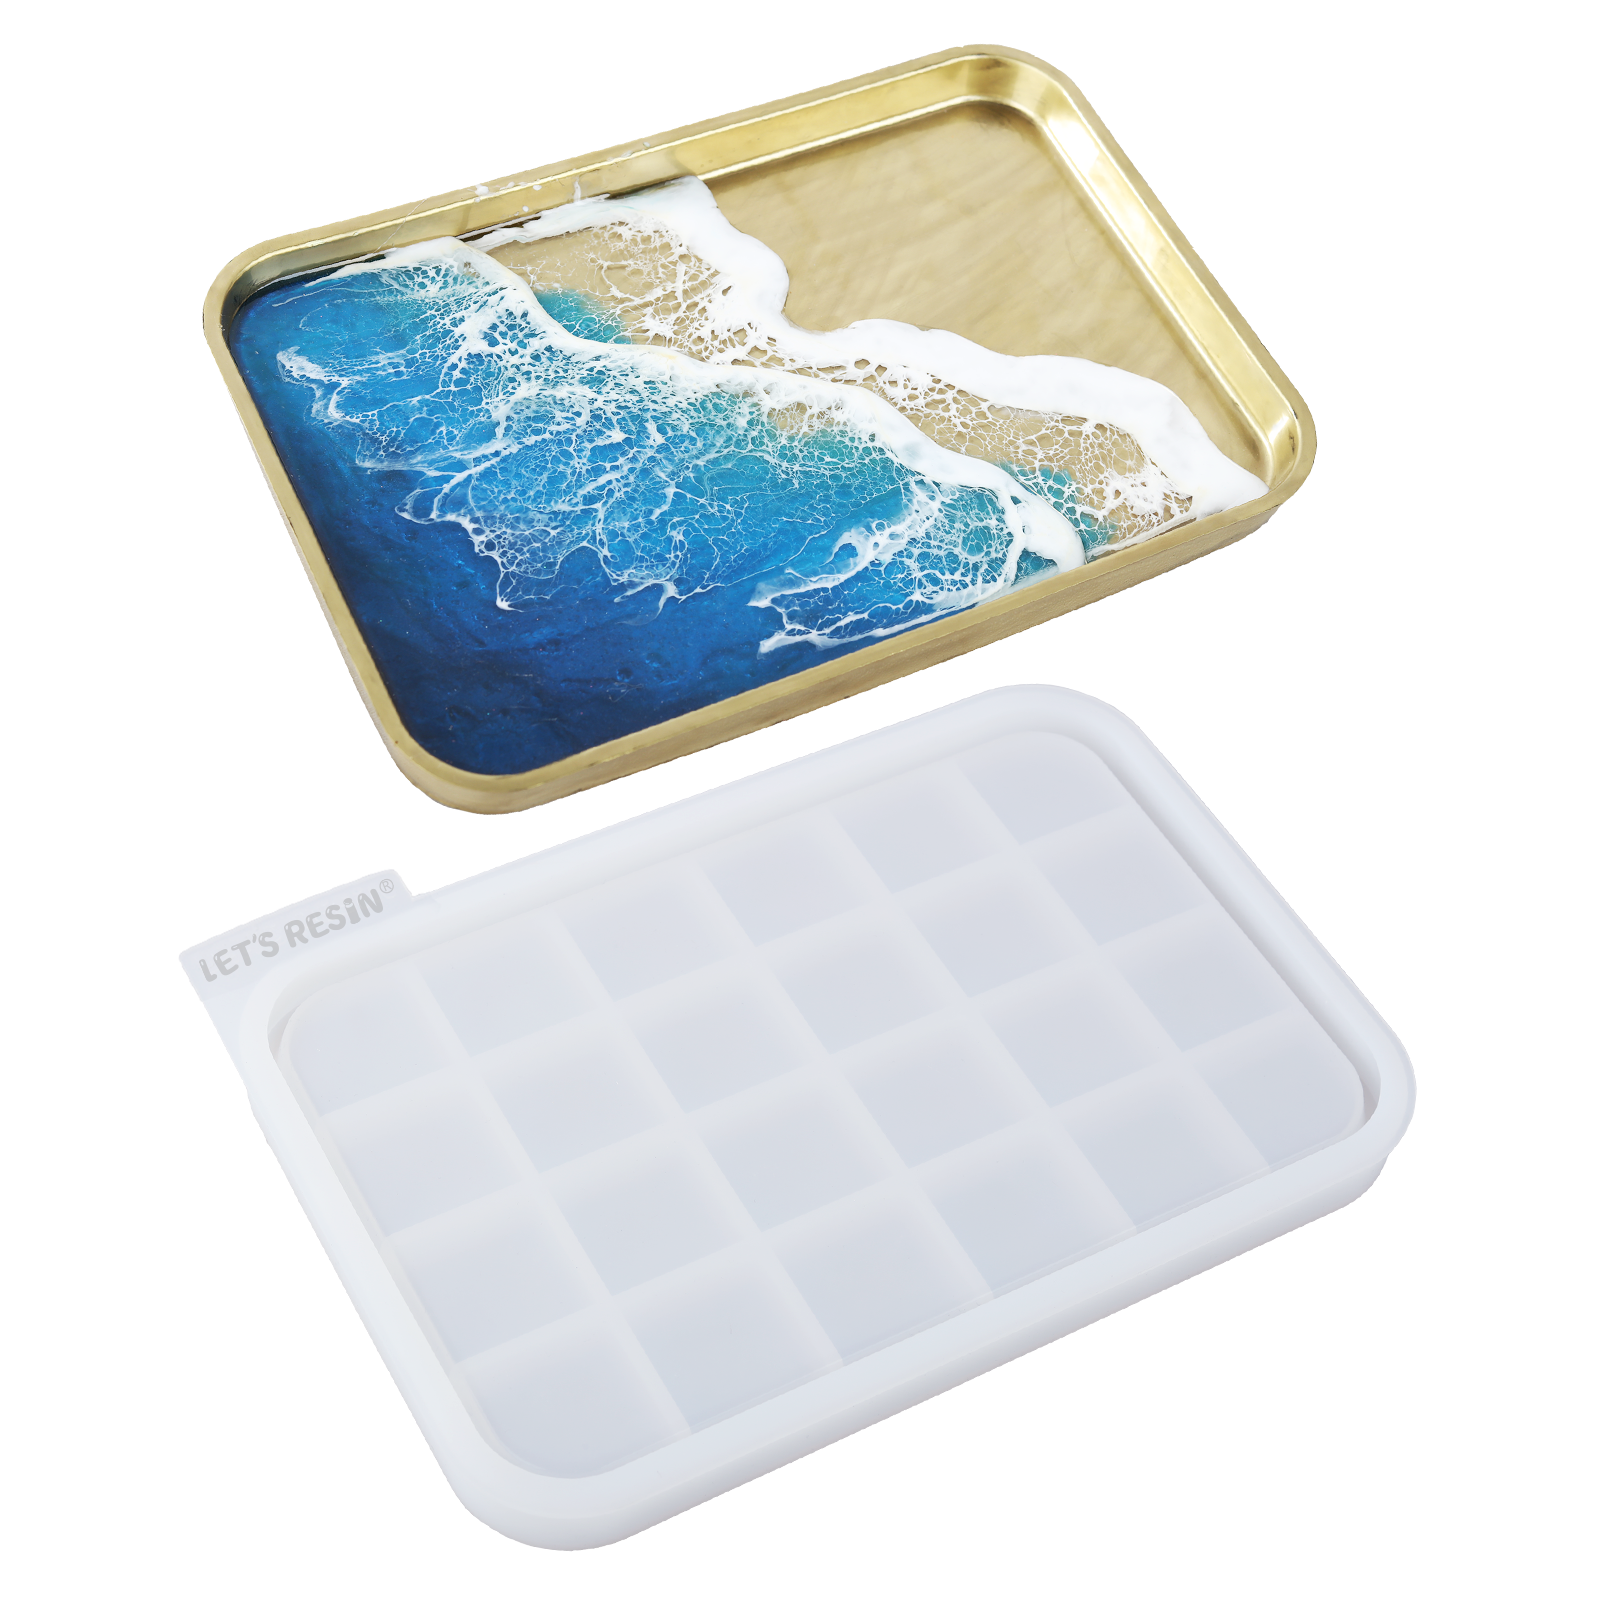 Rolling Tray Molds Glossy Rolling Tray Rolling Tray Kit Grinder